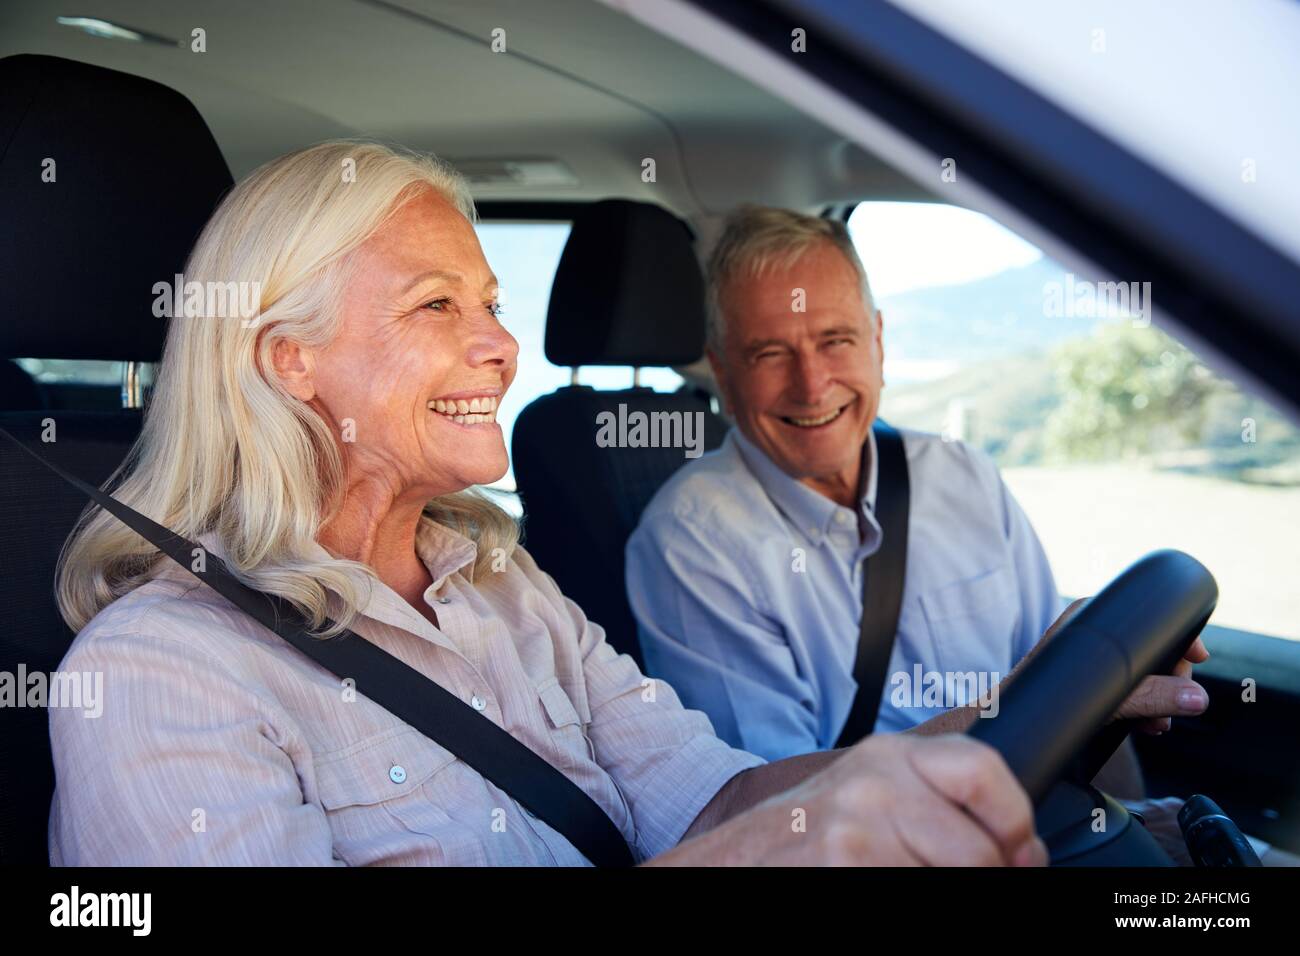 Senior white woman driving car, her husband beside her in front passenger seat, close up, side view Stock Photo